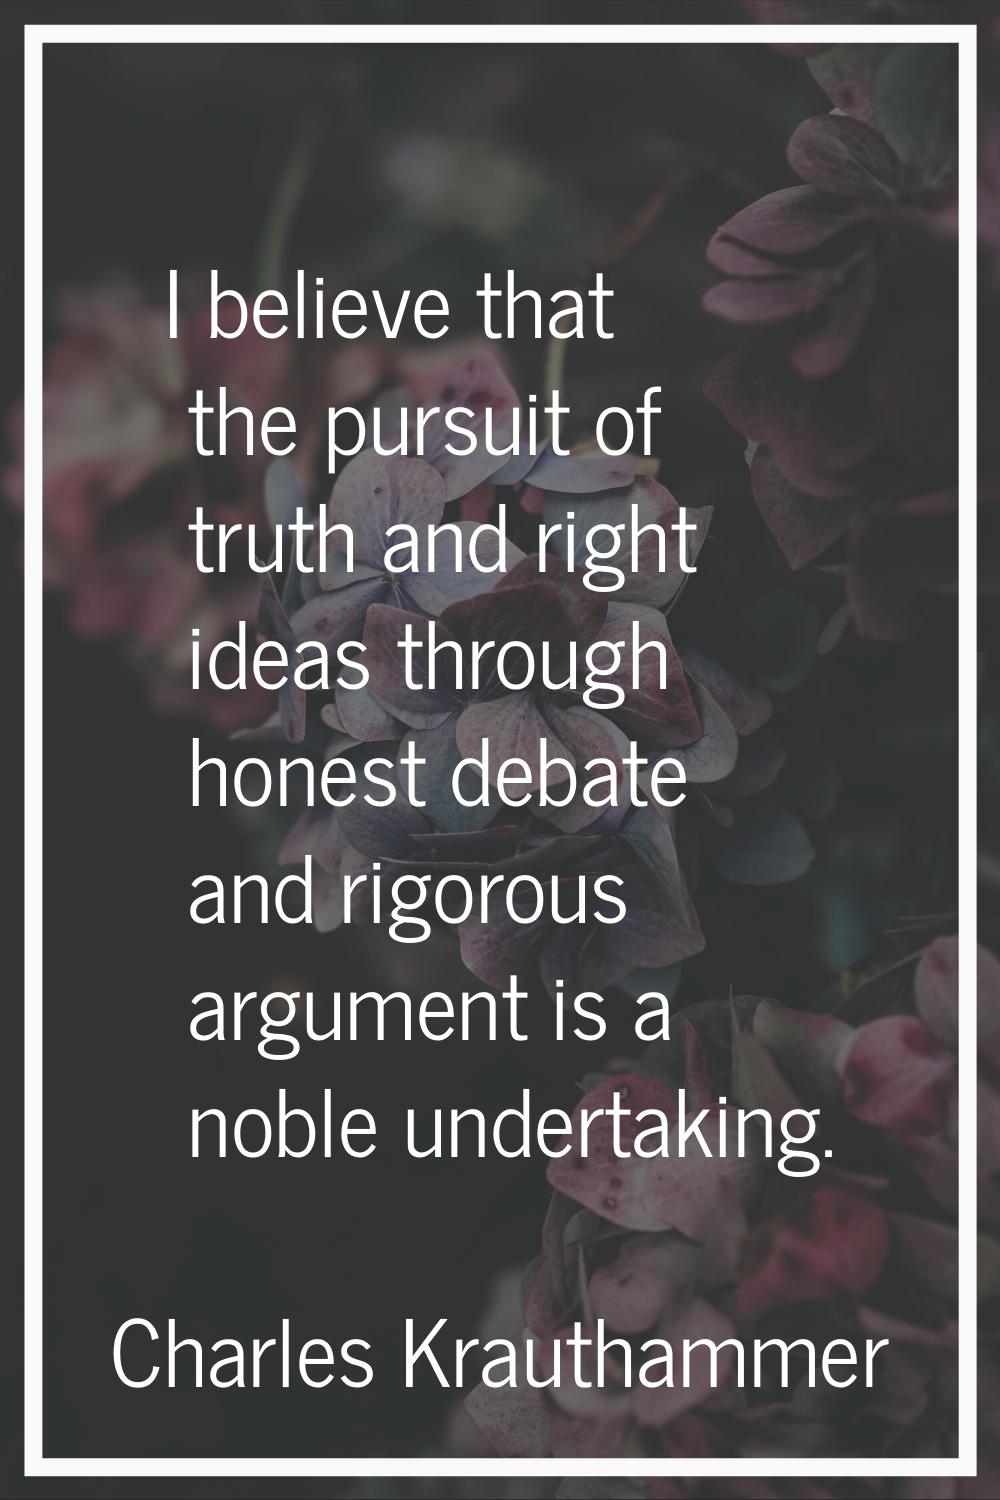 I believe that the pursuit of truth and right ideas through honest debate and rigorous argument is 